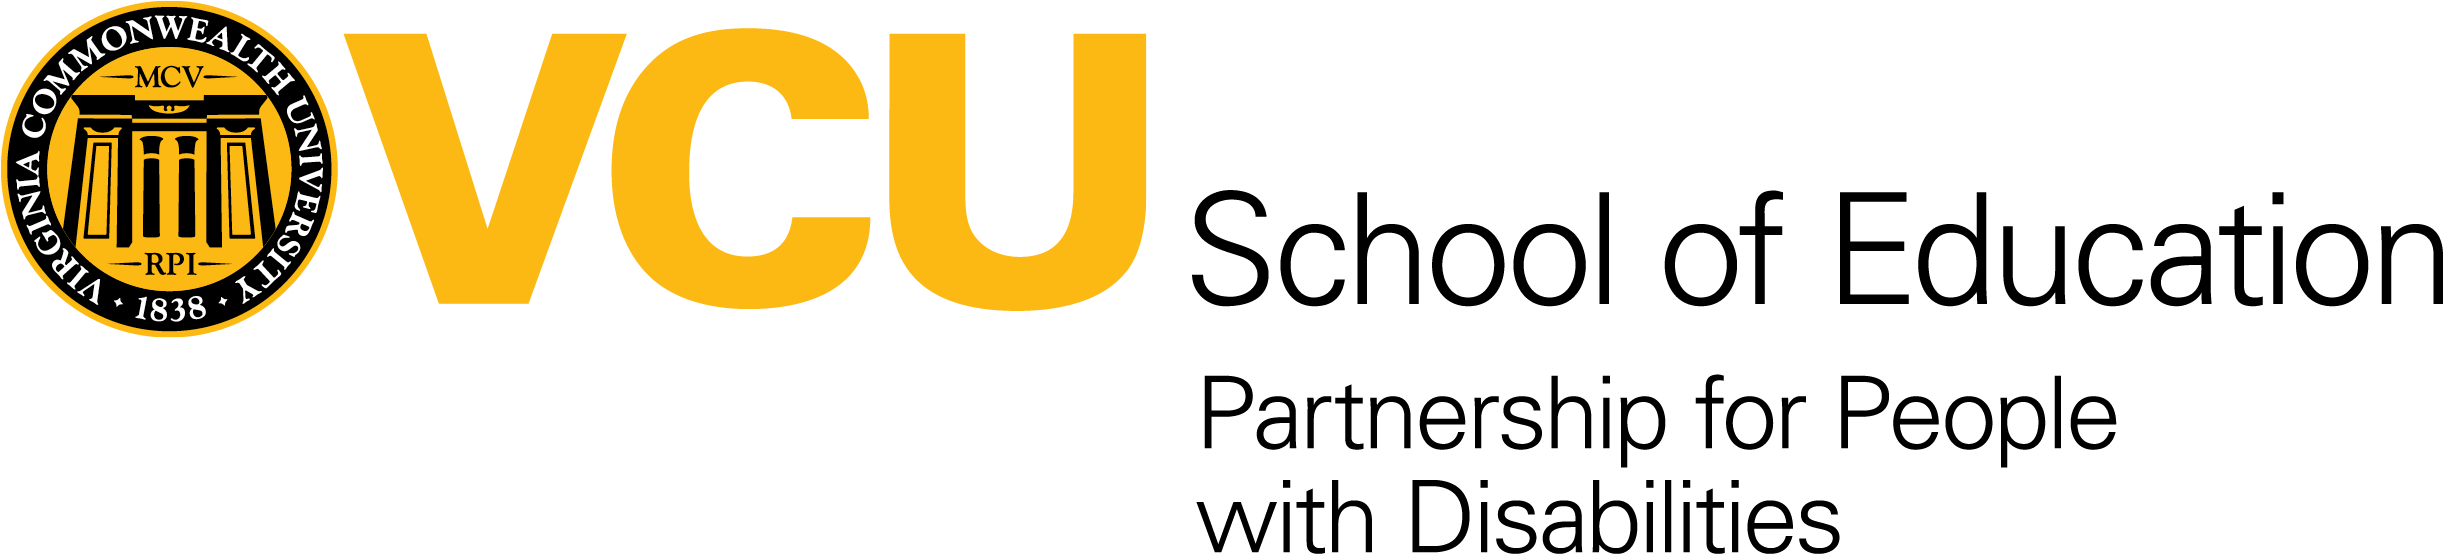 Logo for thePartnership for People with Disabilities in the VCU School of Education